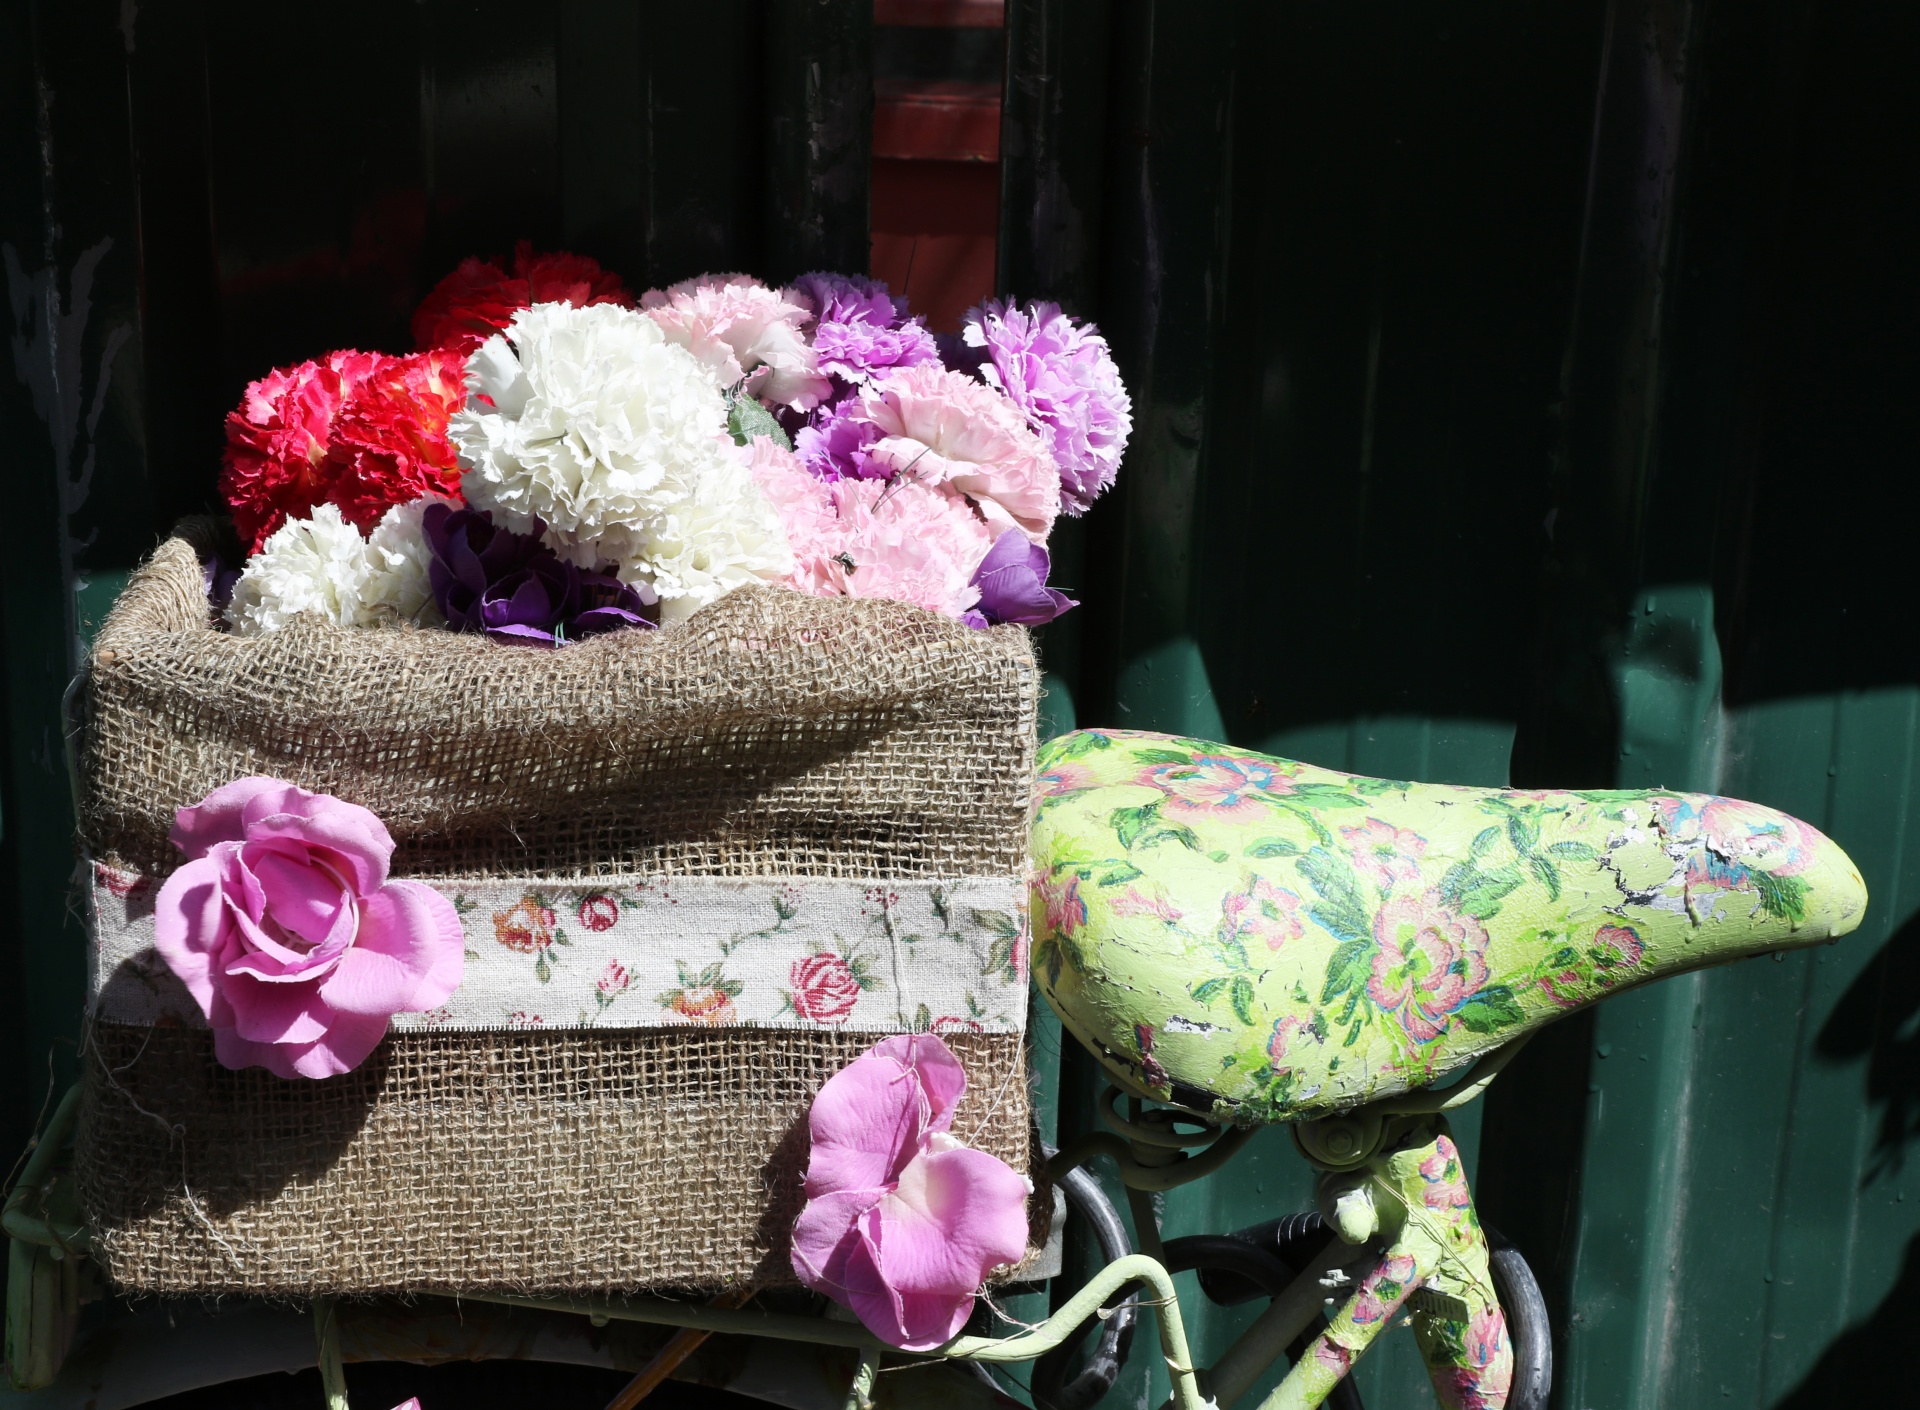 Close-up of a floral bicycle saddle and box of carnation flowers